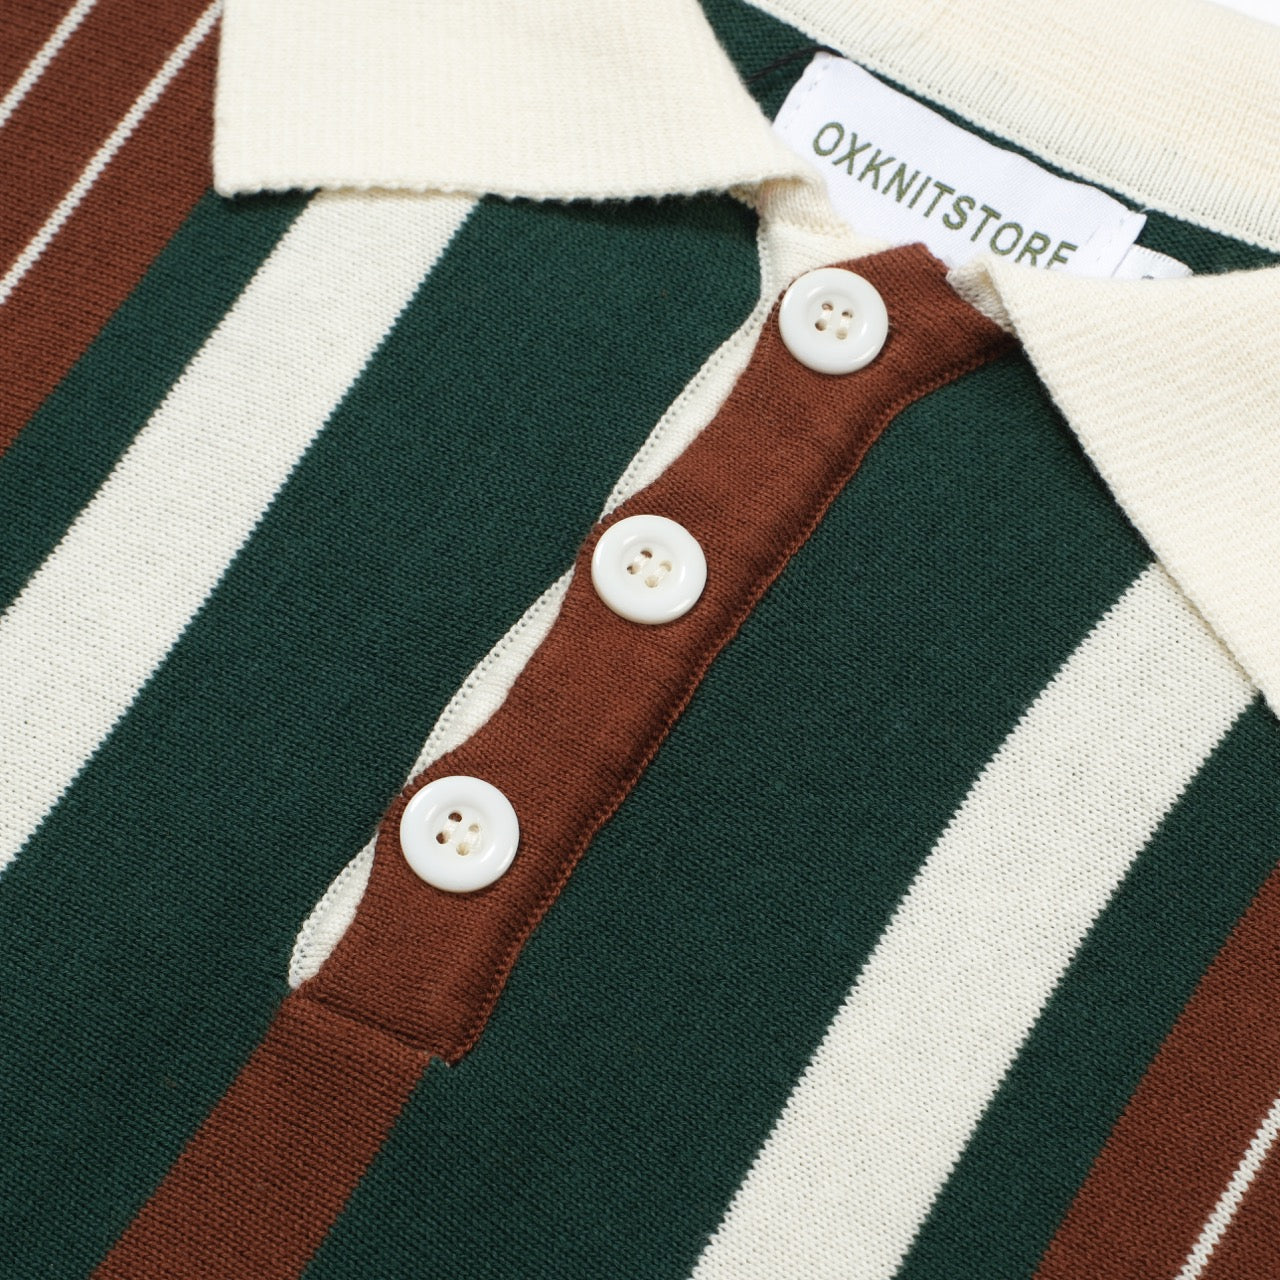 OXKNIT Men Vintage Clothing 1960s Mod Style Casual Stripe Green &Brown Knitted Retro Polo Shirt